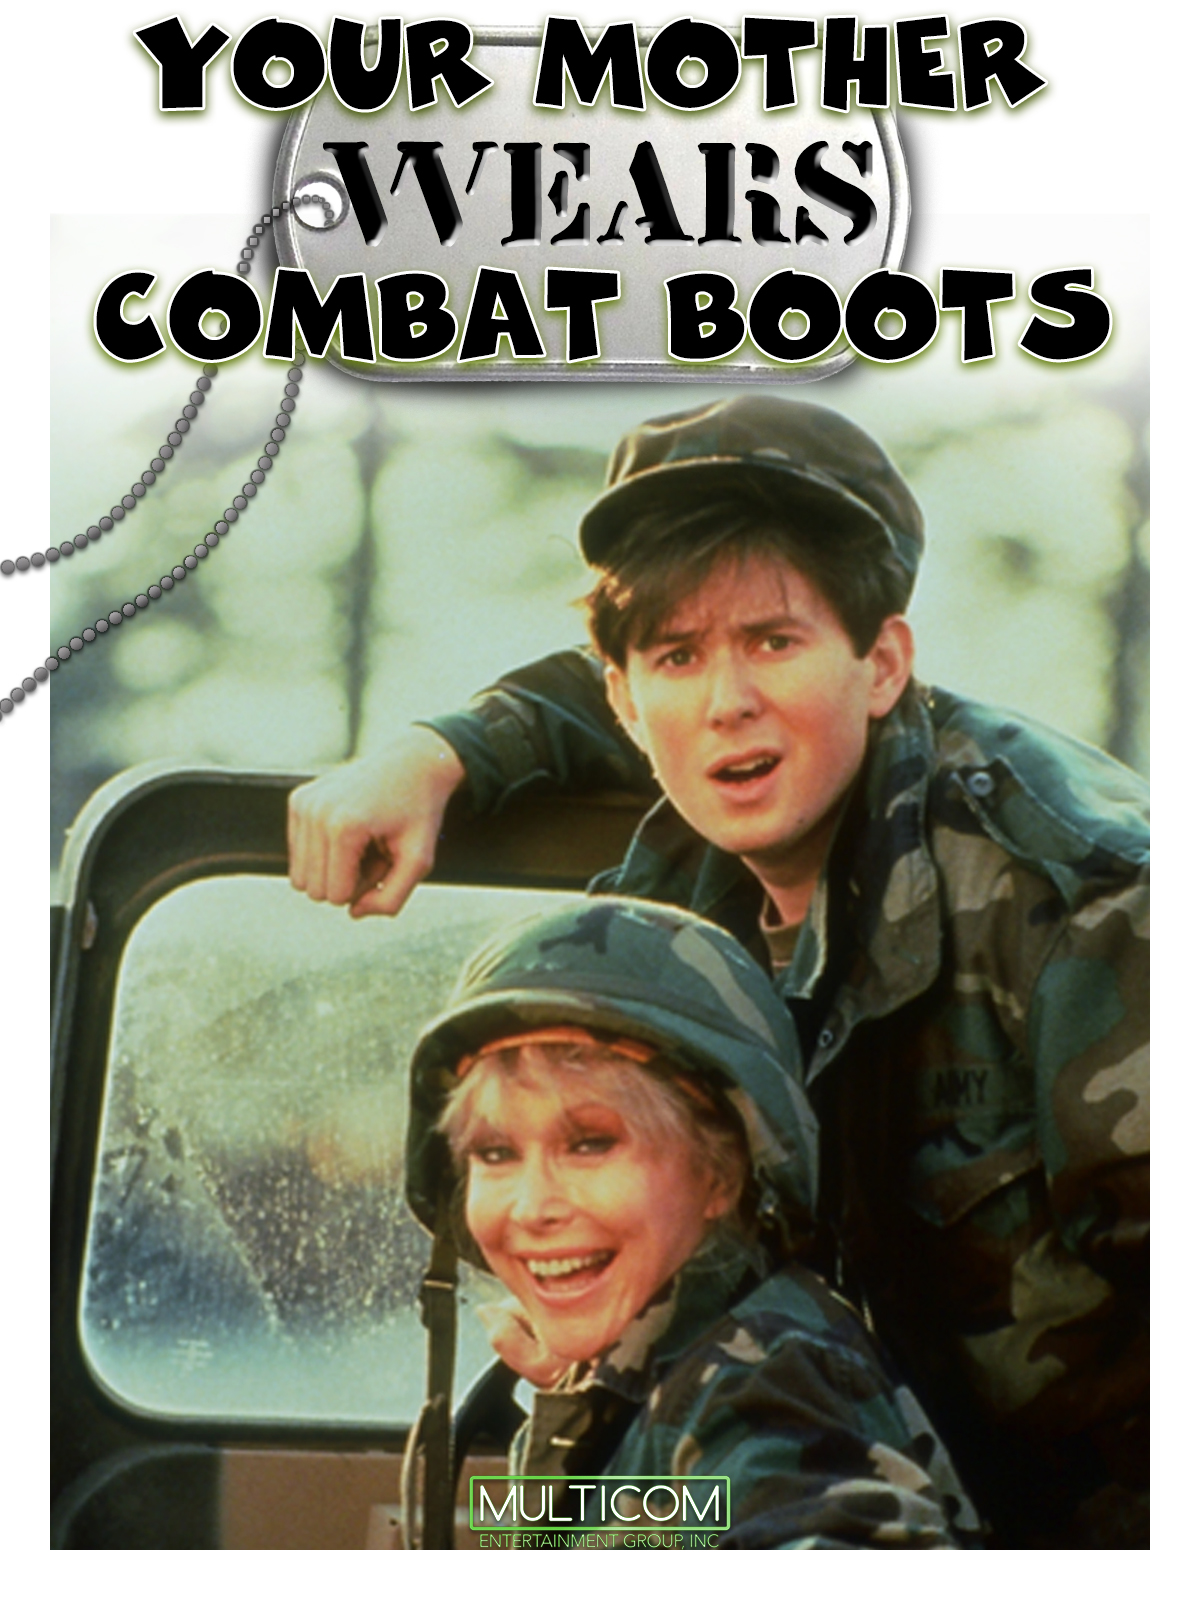 Your Mother Wears Combat Boots (1989) starring Barbara Eden on DVD on DVD